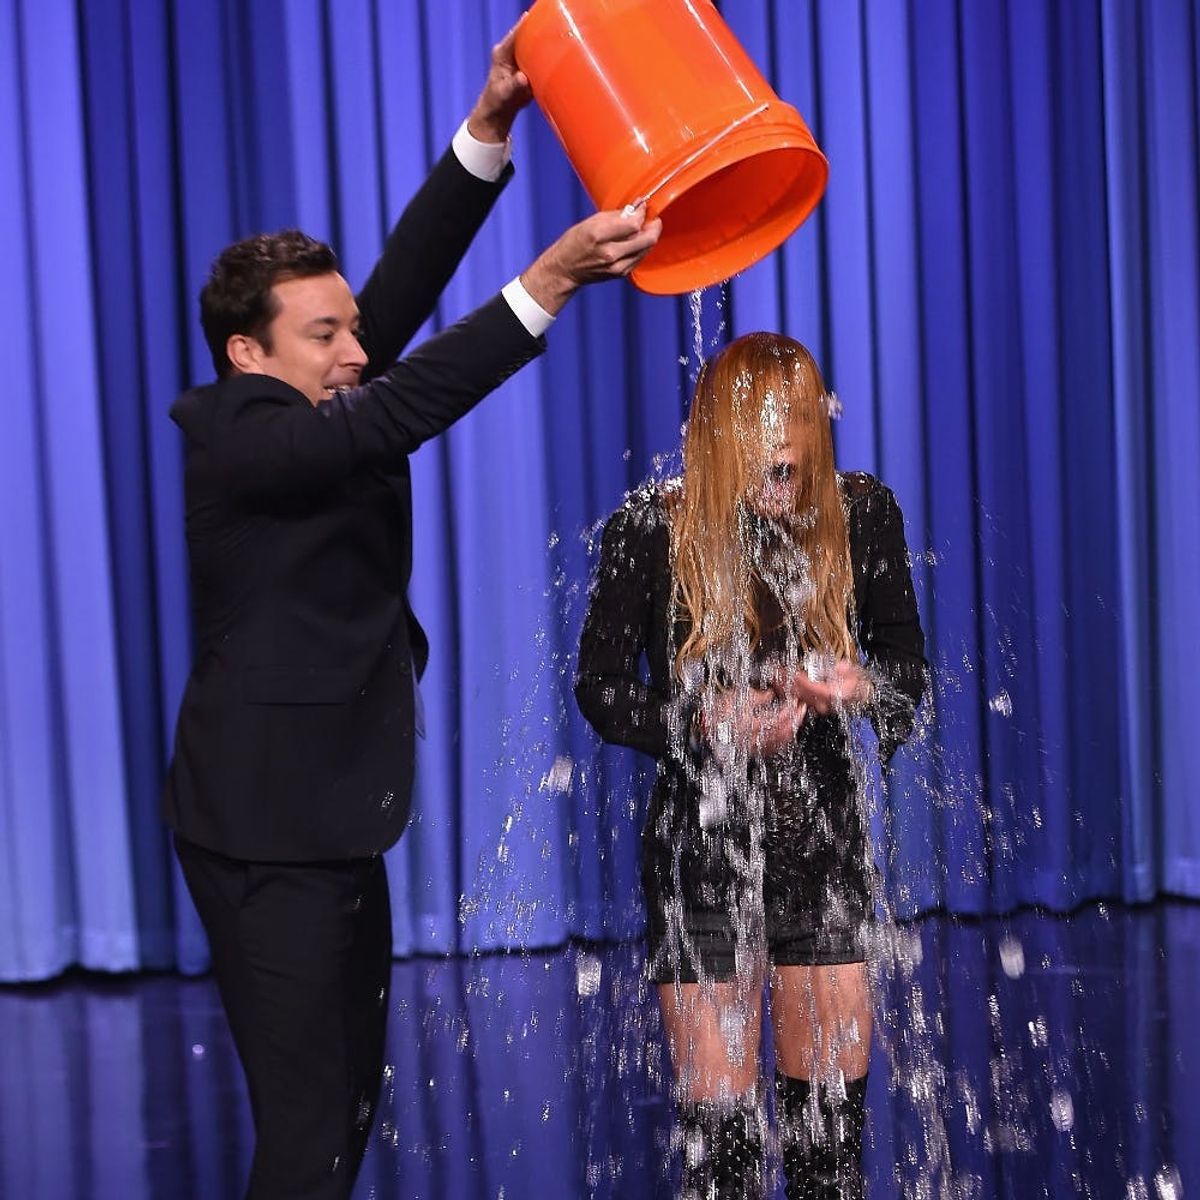 The Ice Bucket Challenge Funded a Major Breakthrough in ALS Research